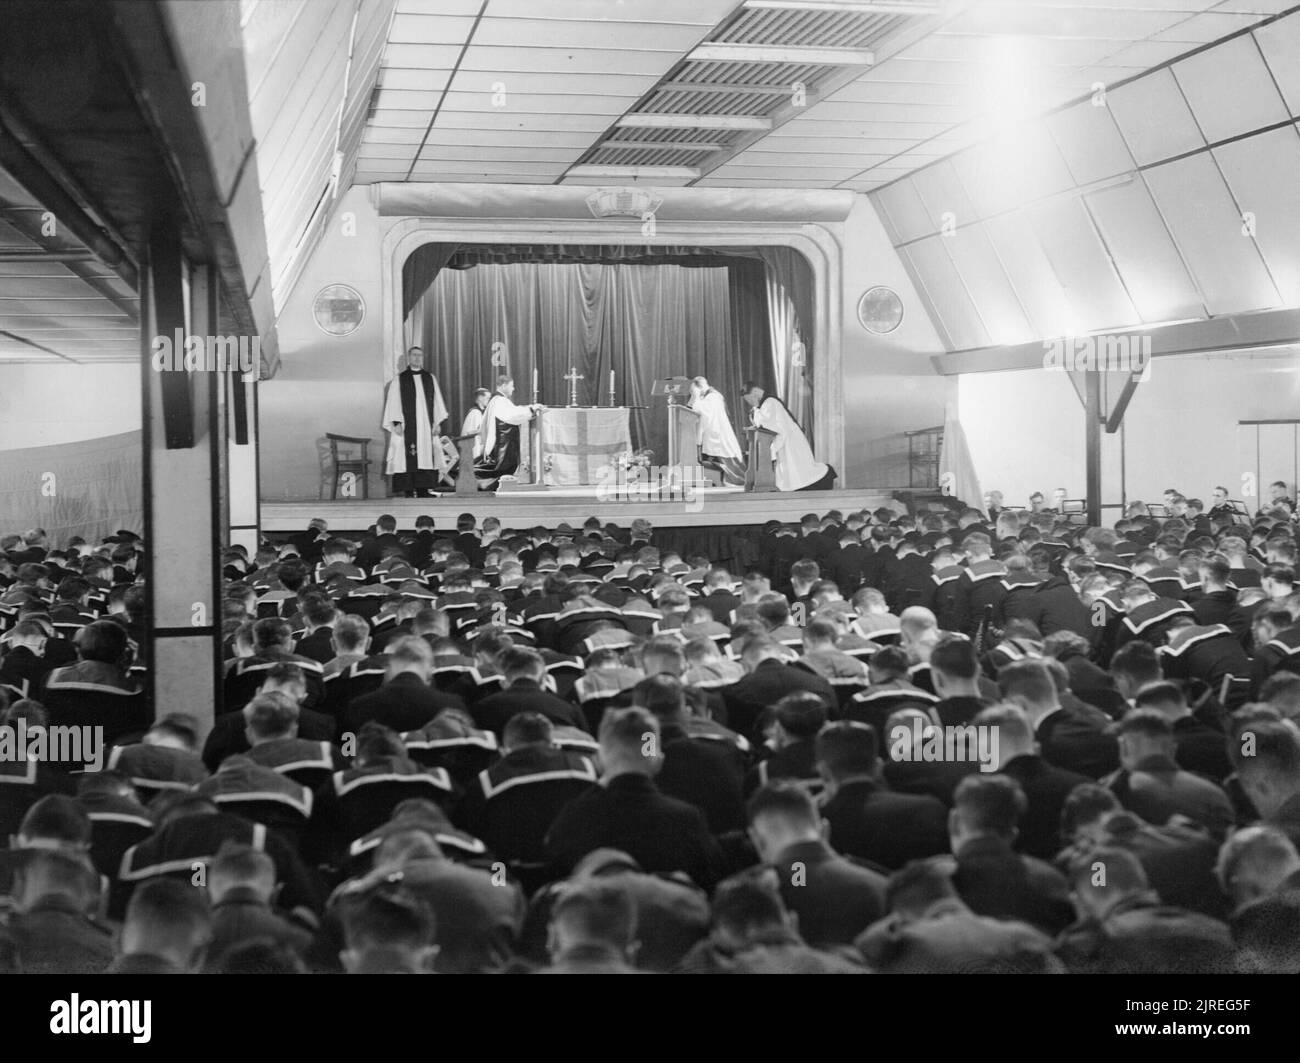 The Archbishop of Canterbury conducts a service in the cinema at Flotta on Orkney during his visit to the Home Fleet at Scapa Flow, 6 September 1942. A general view of the service carried out by the Archbishop of Canterbury in the cinema at Flotta on The Orkneys during his visit to the Home Fleet at Scapa Flow. Stock Photo